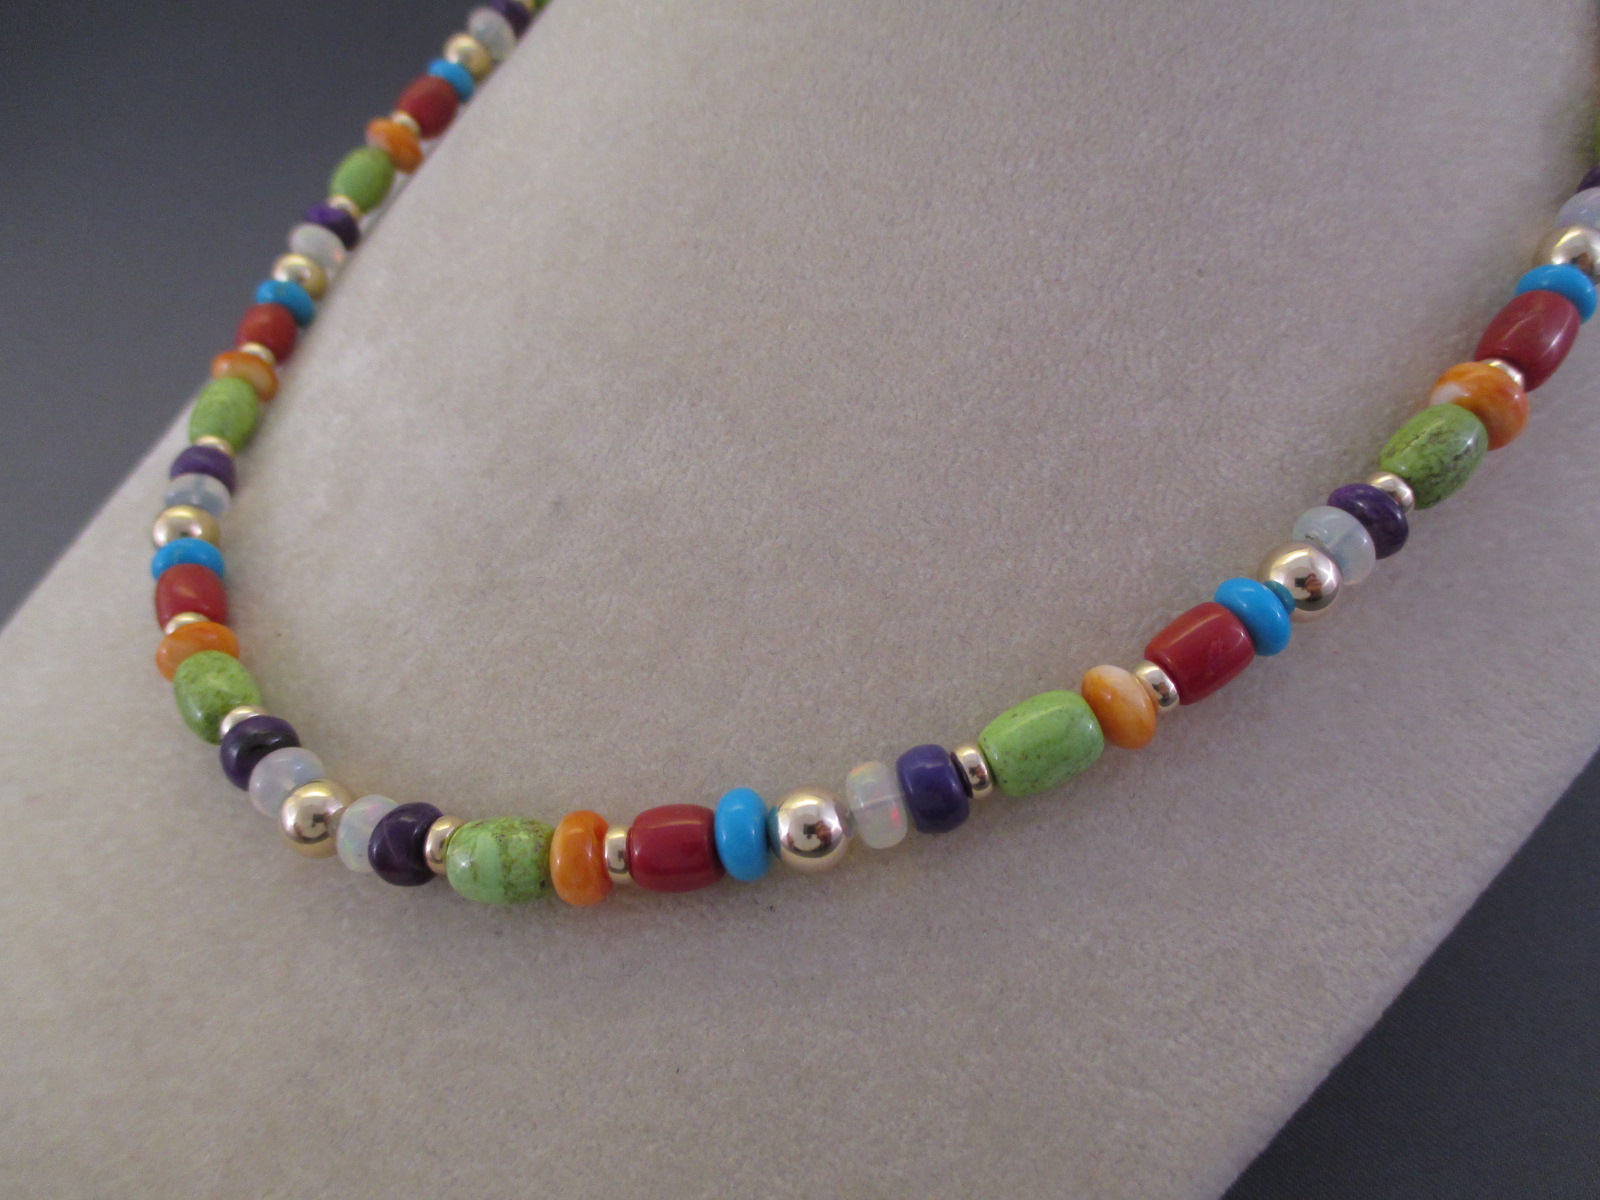 14kt Gold Multi-Stone Necklace - Colorful Gold Necklace